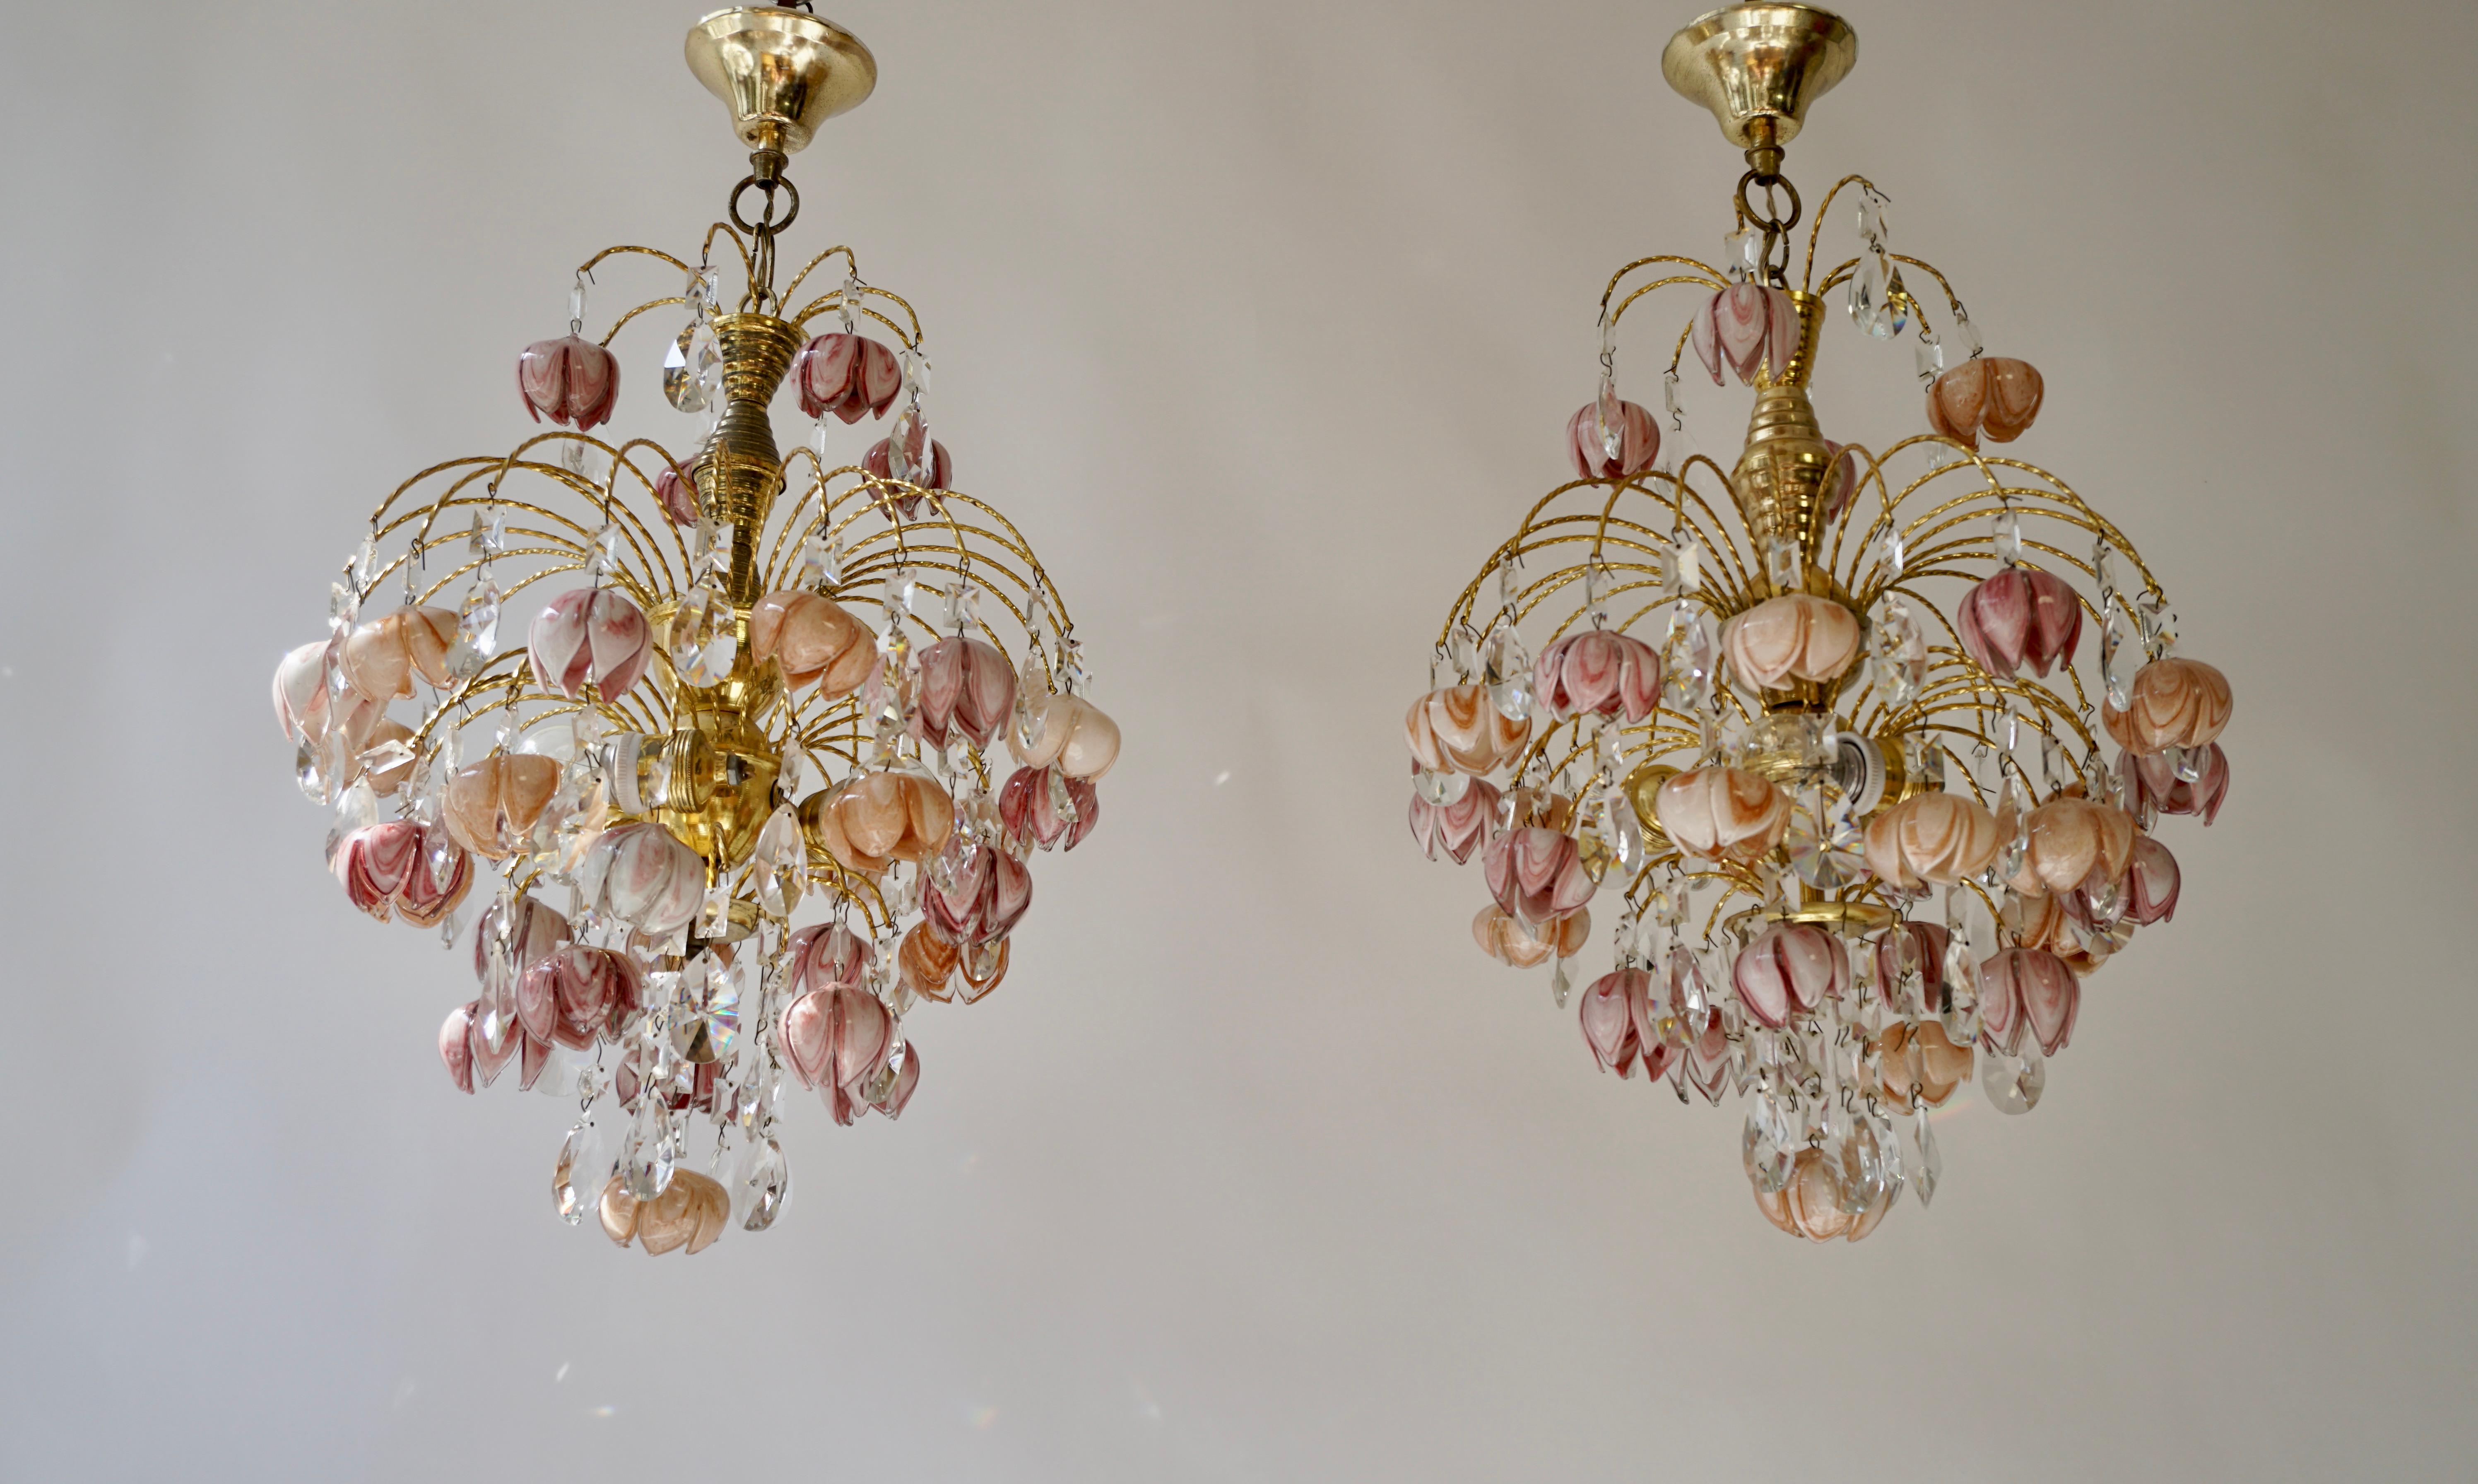 20th Century Pair of Murano Glass Floral Chandeliers, Italy, 1970s For Sale